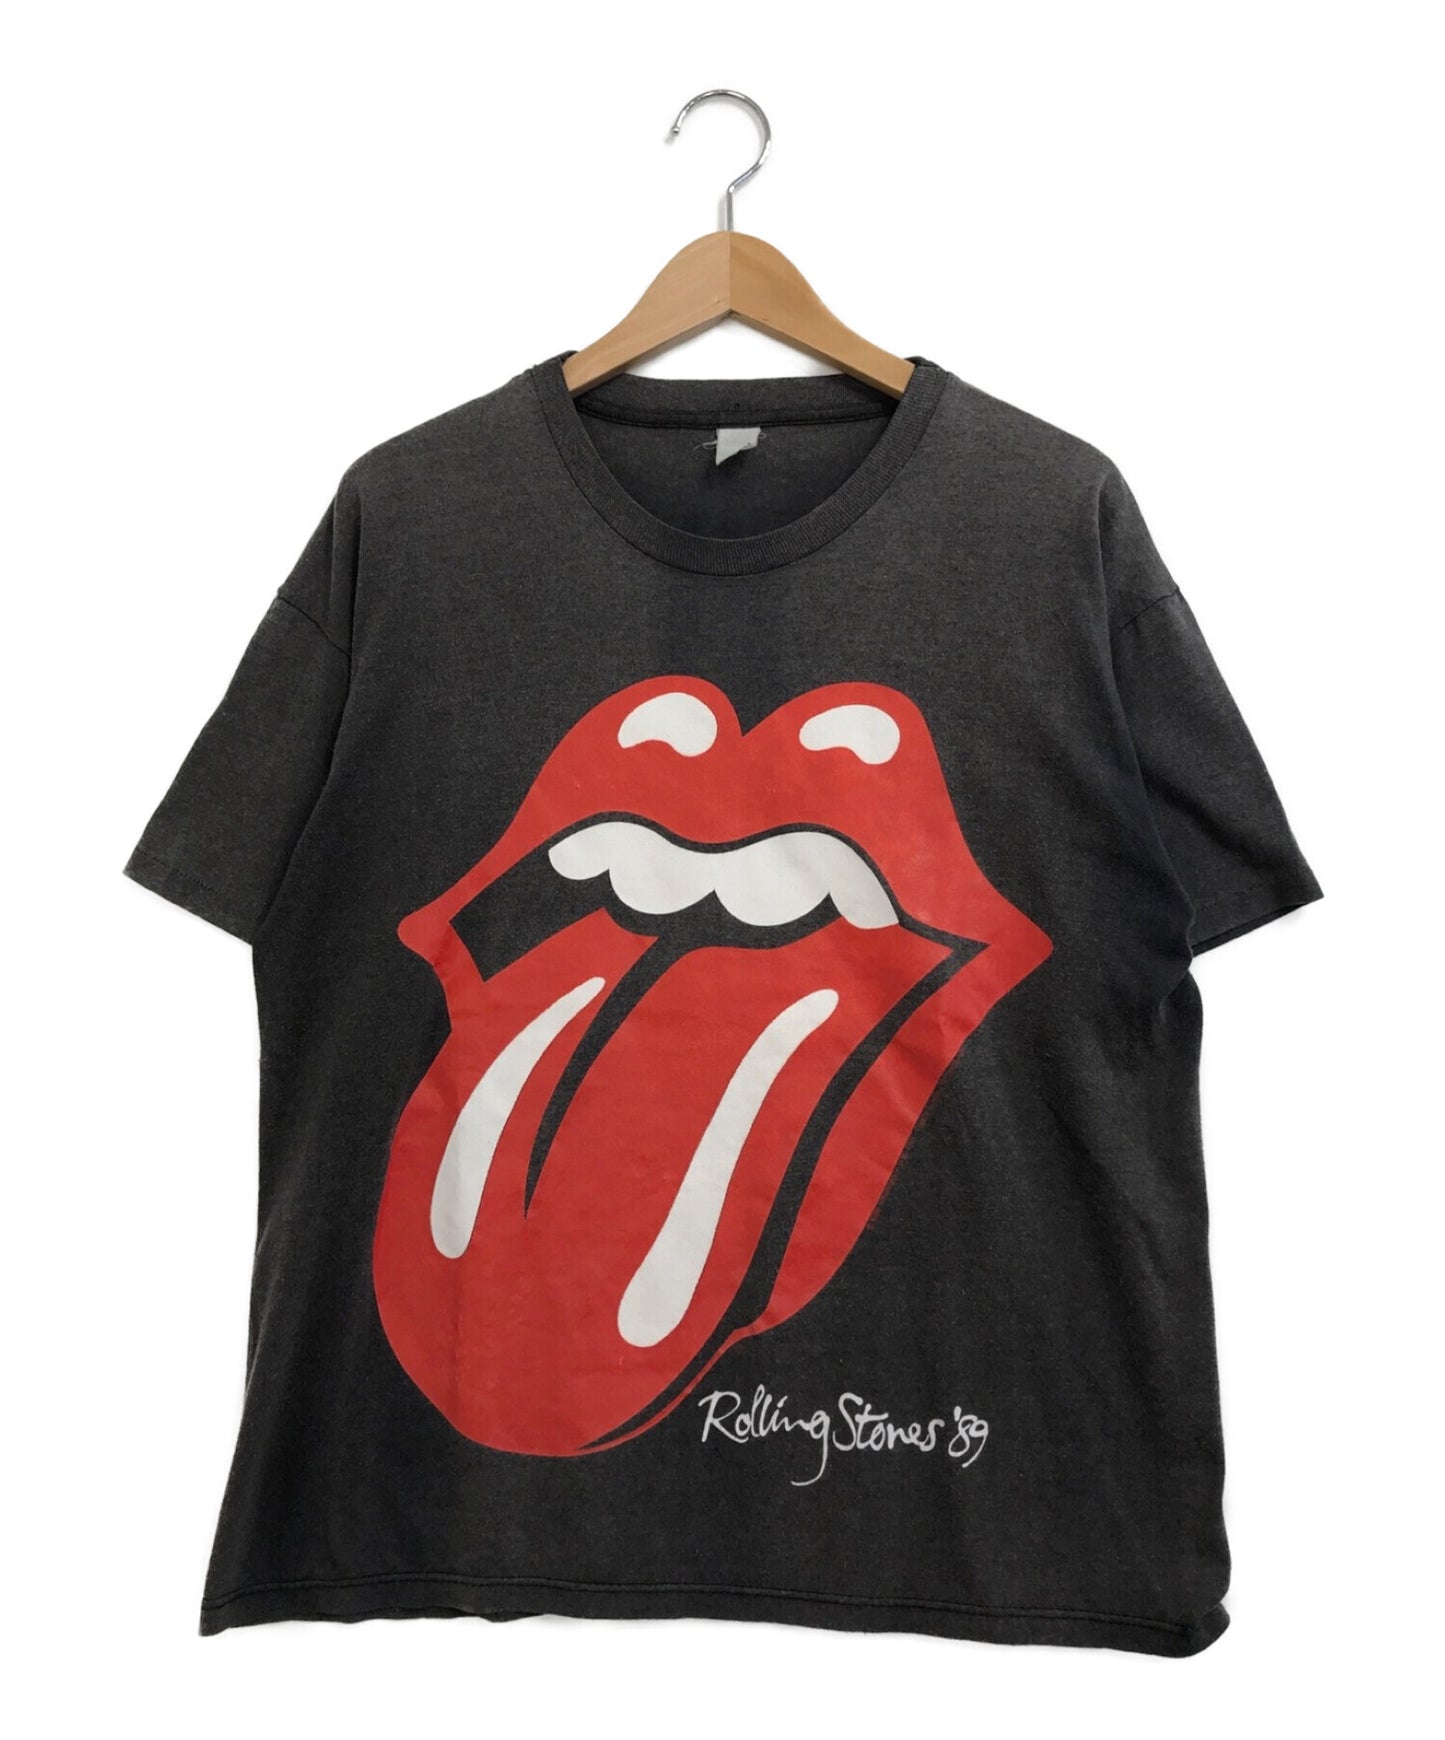 THE ROLLING STONES Band T-Shirt